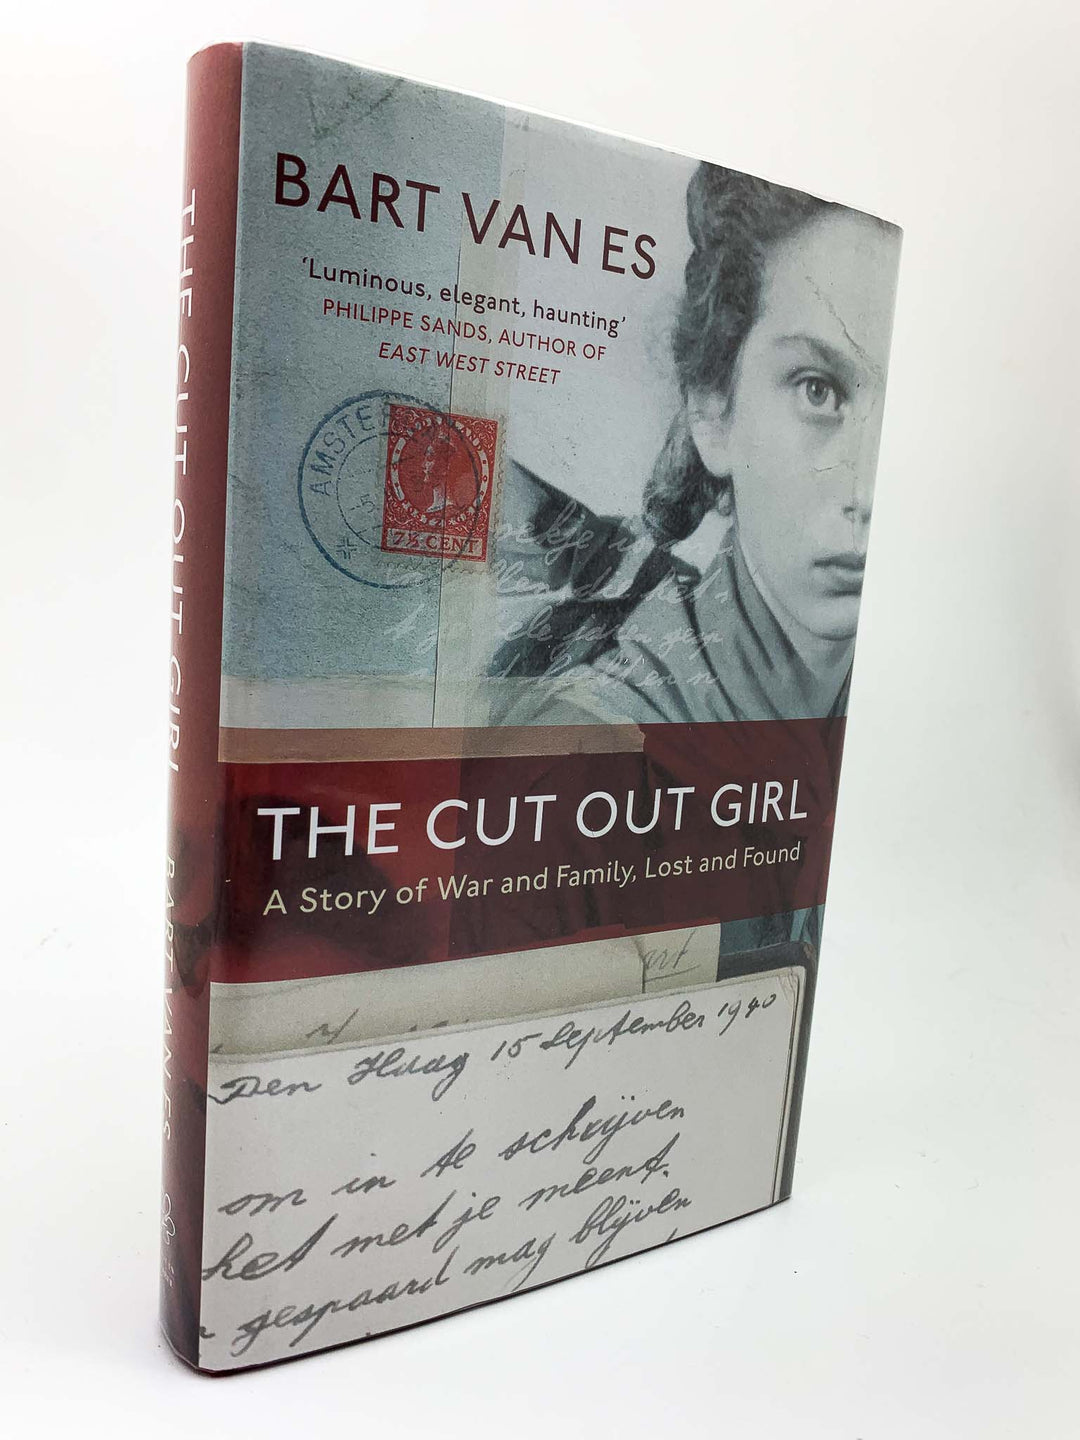 van Es, Bart - The Cut Out Girl | front cover